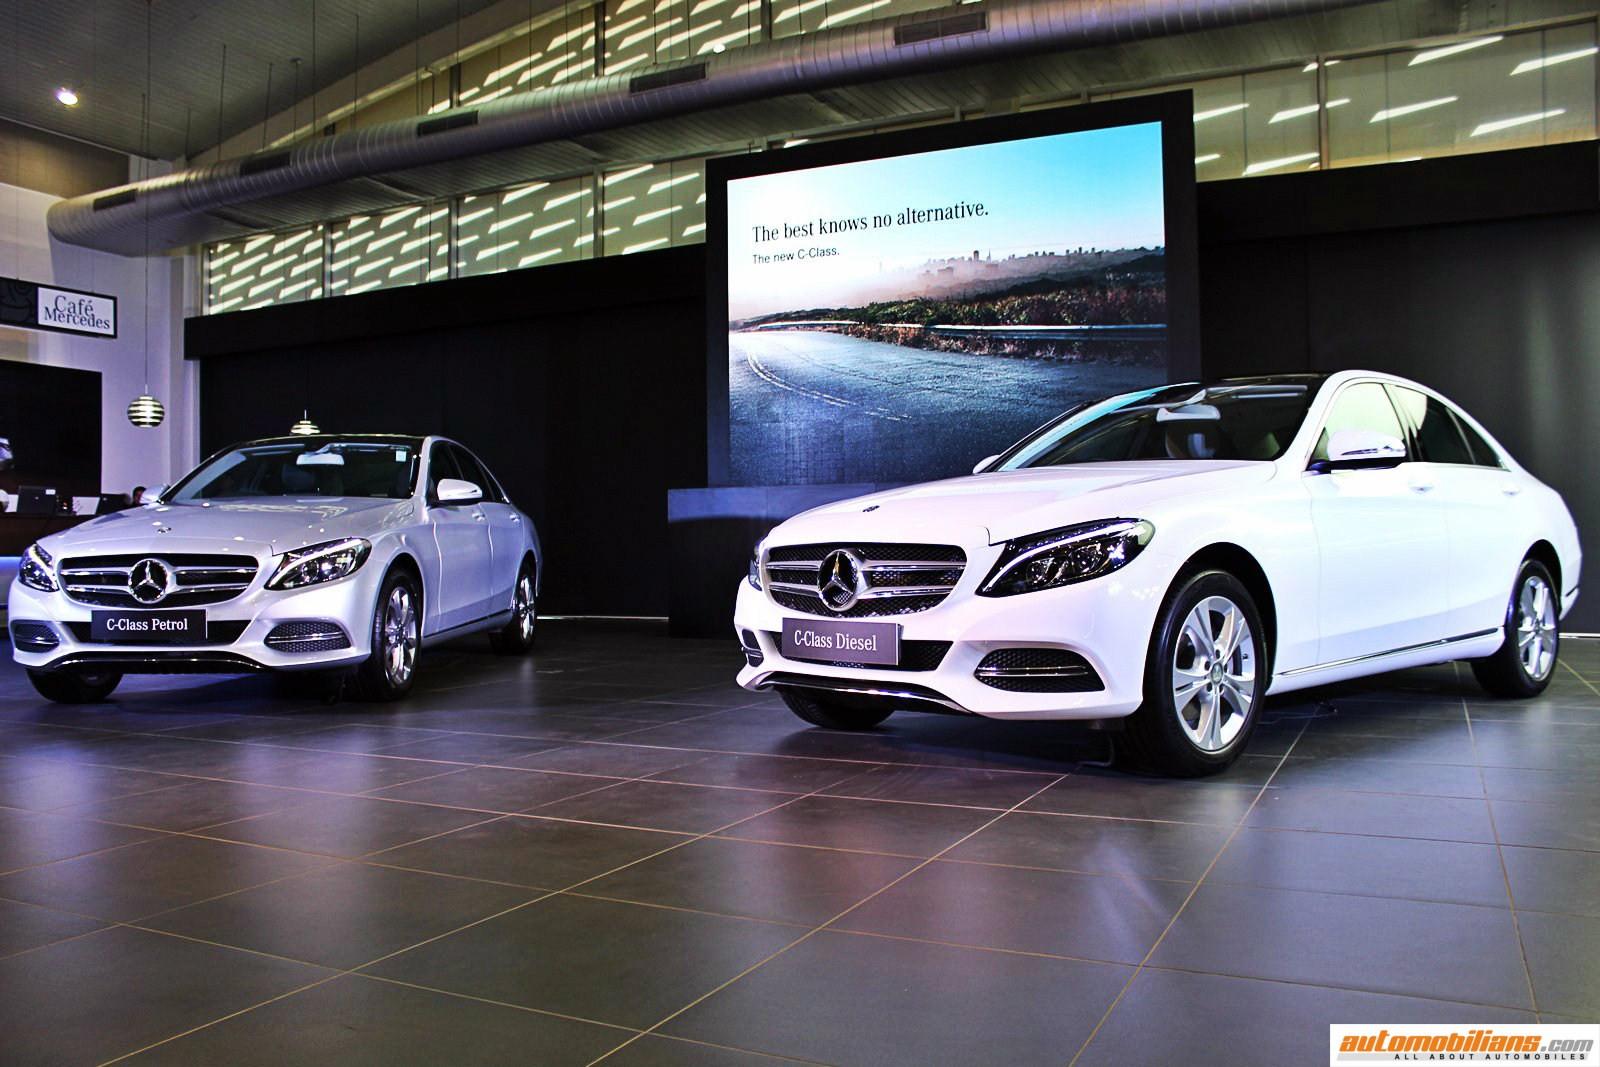 Mercedes-Benz C-Class Diesel & C-Class Petrol (CKD) Launched in India at Rs. 39.90 Lakhs & Rs. 40.90 Lakhs (Ex-Showroom, Delhi) Respectively